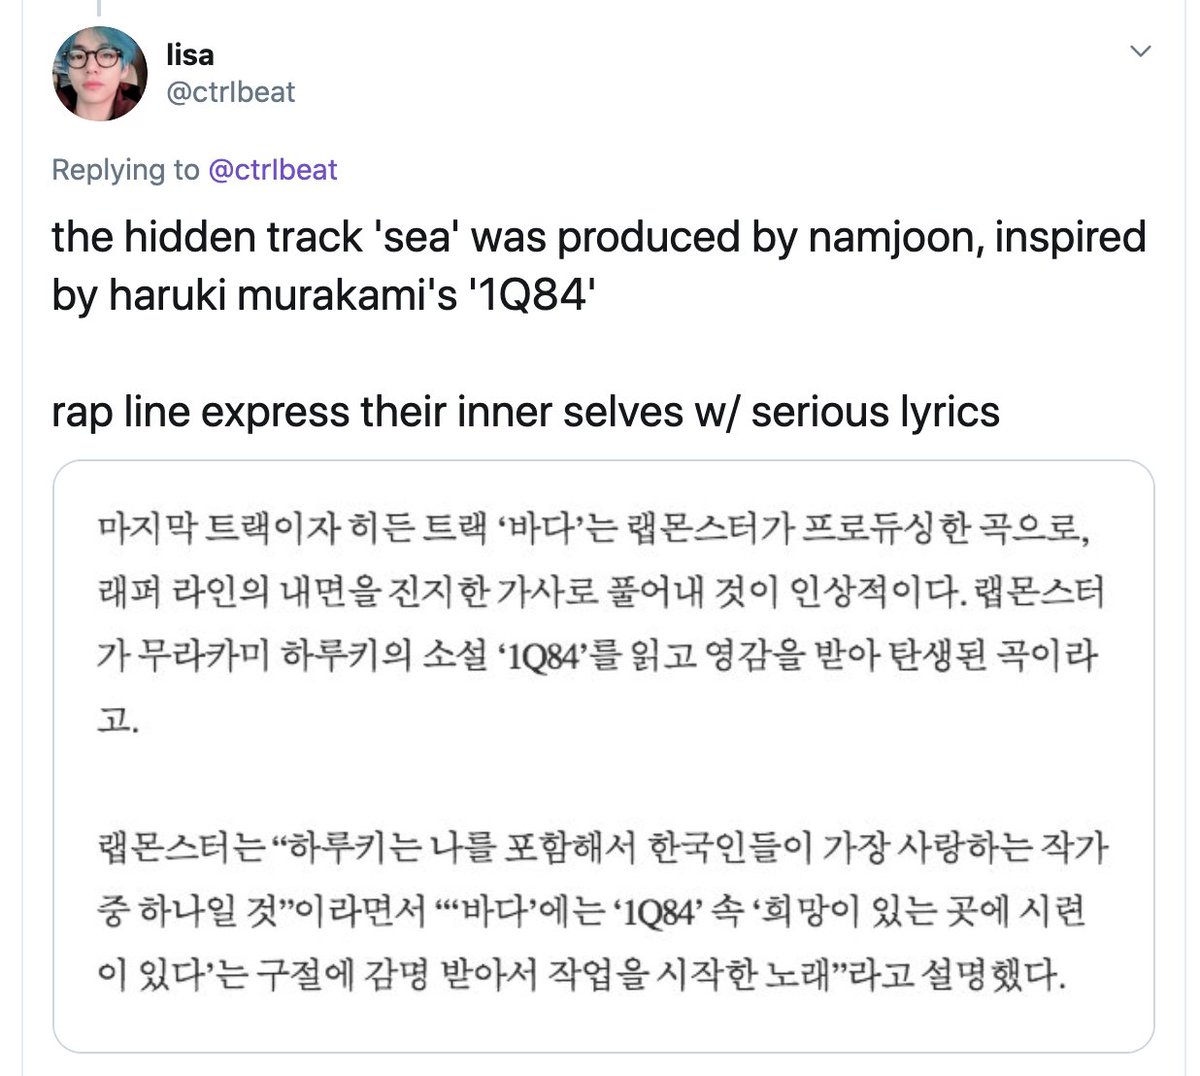 and often the books that namjoon read are incorporated into the concepts of bts lyrics - for example demian, a book namjoon recommended is referenced throughout the wings era and in blood sweat and tears